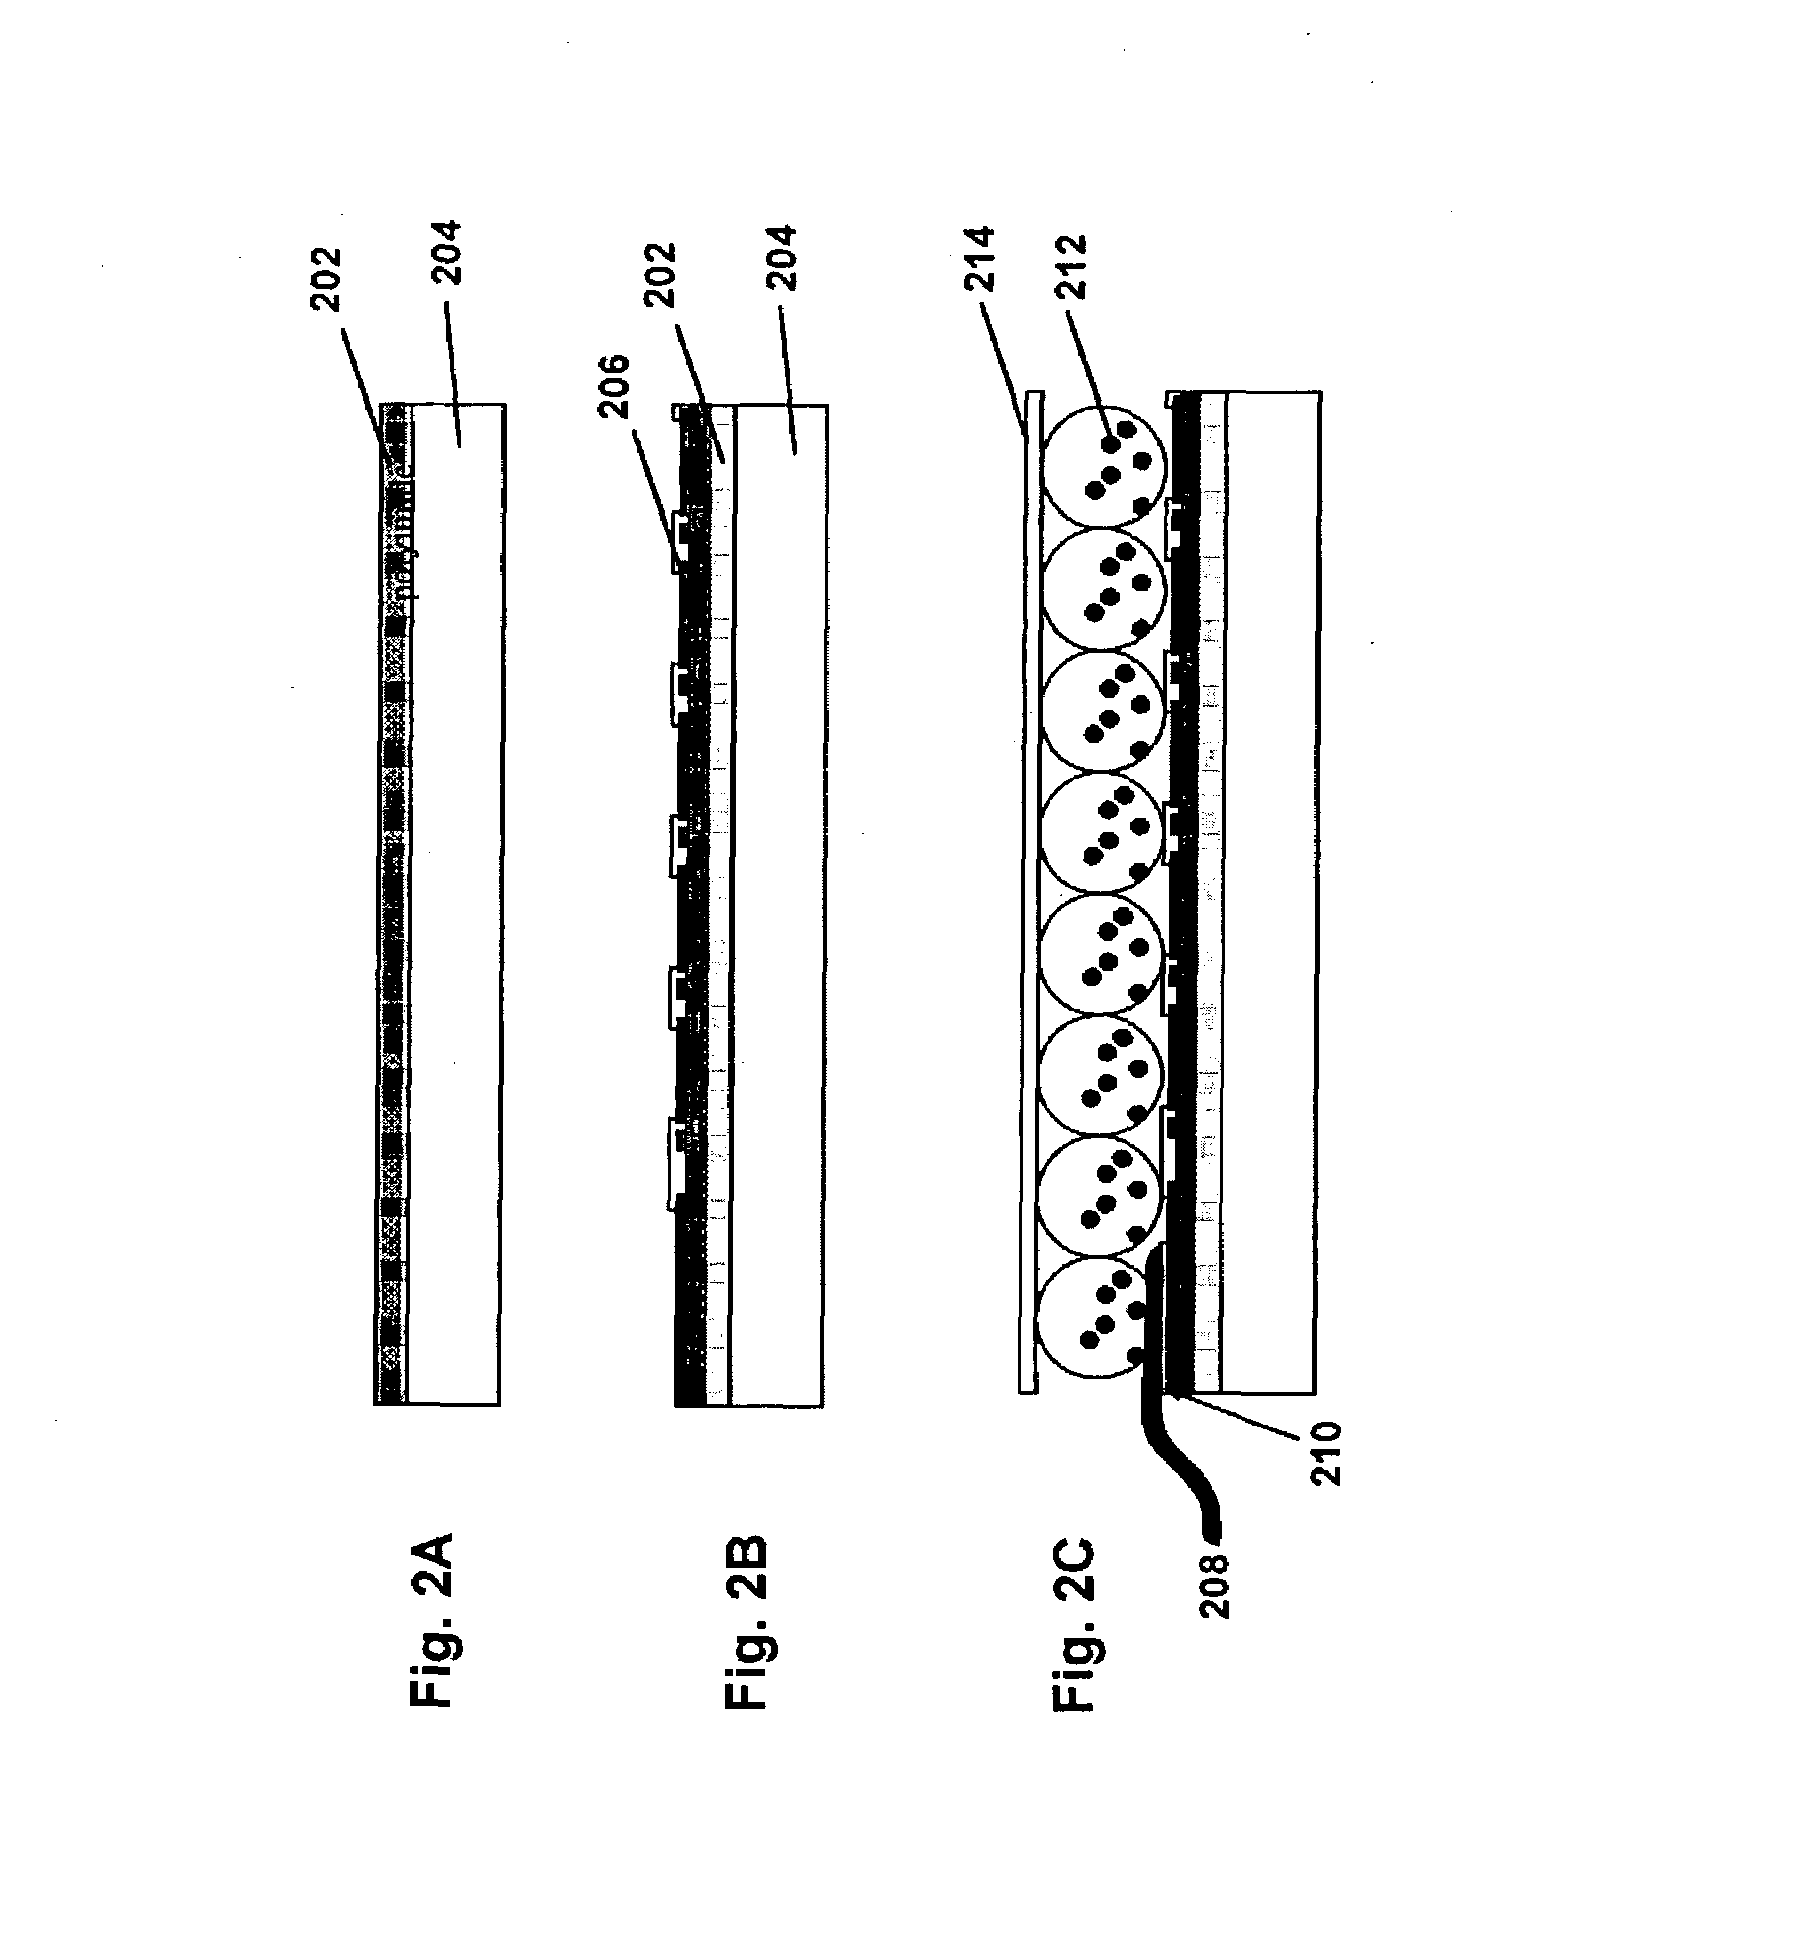 Processes for forming backplanes for electro-optic displays